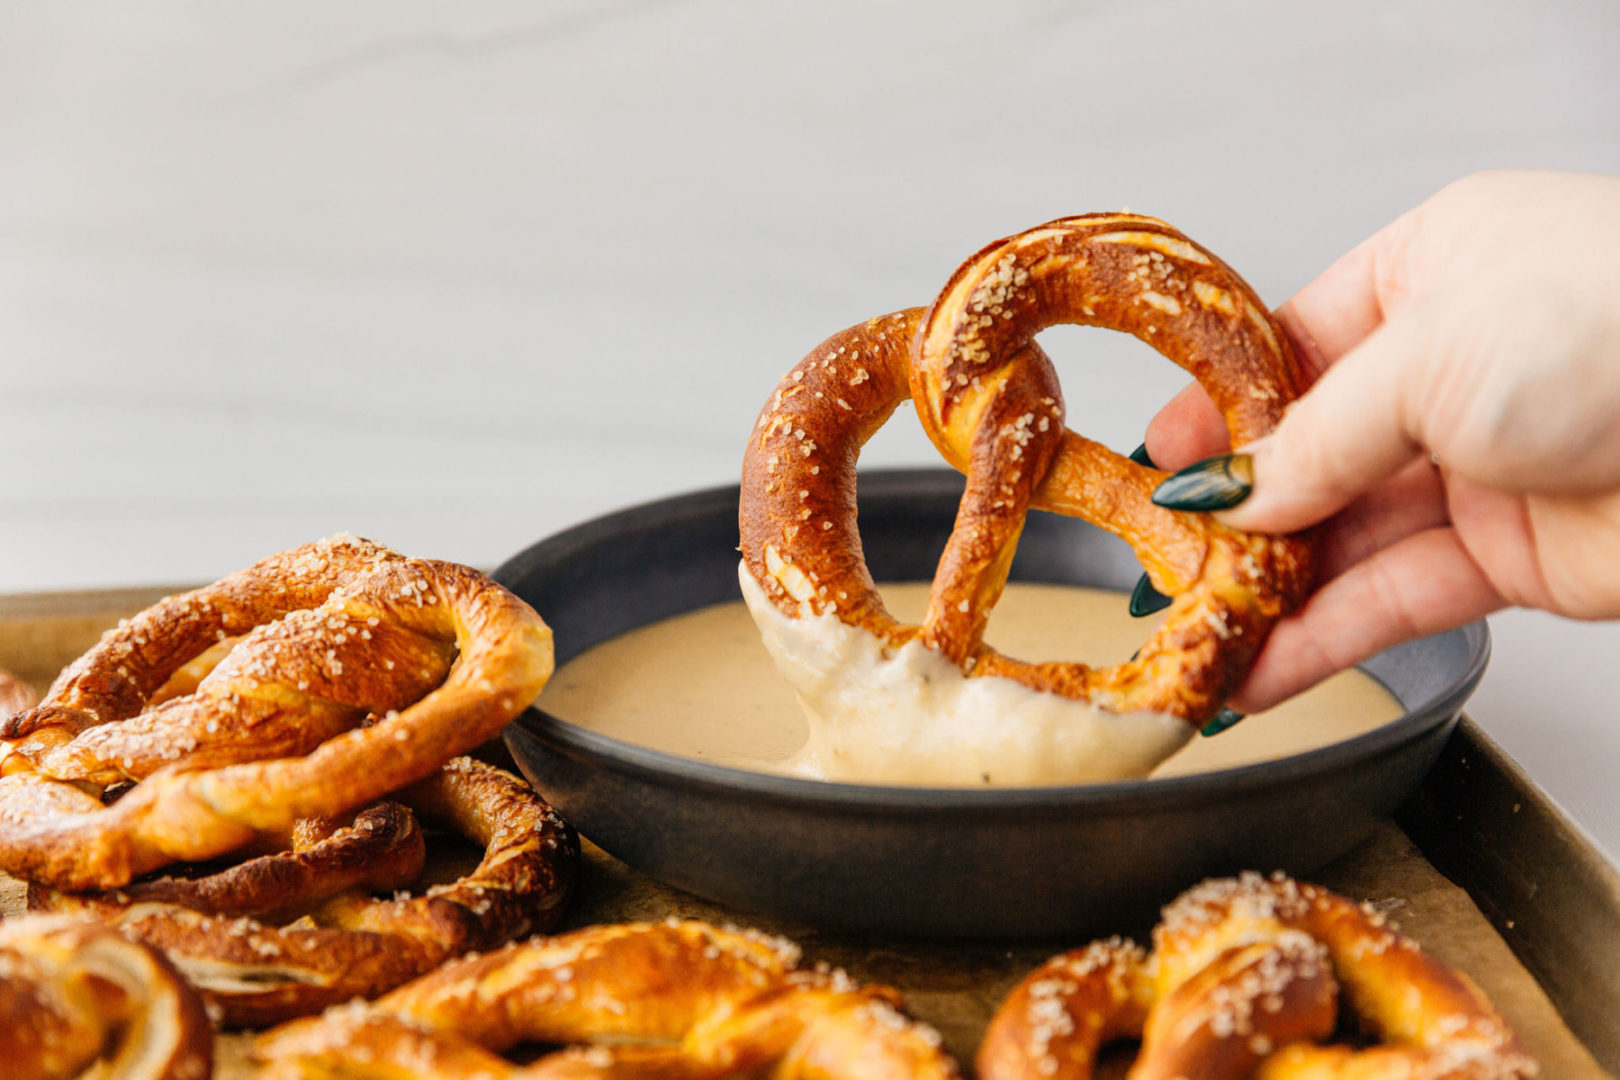 HOMEMADE PRETZELS WITH BEER CHEESE